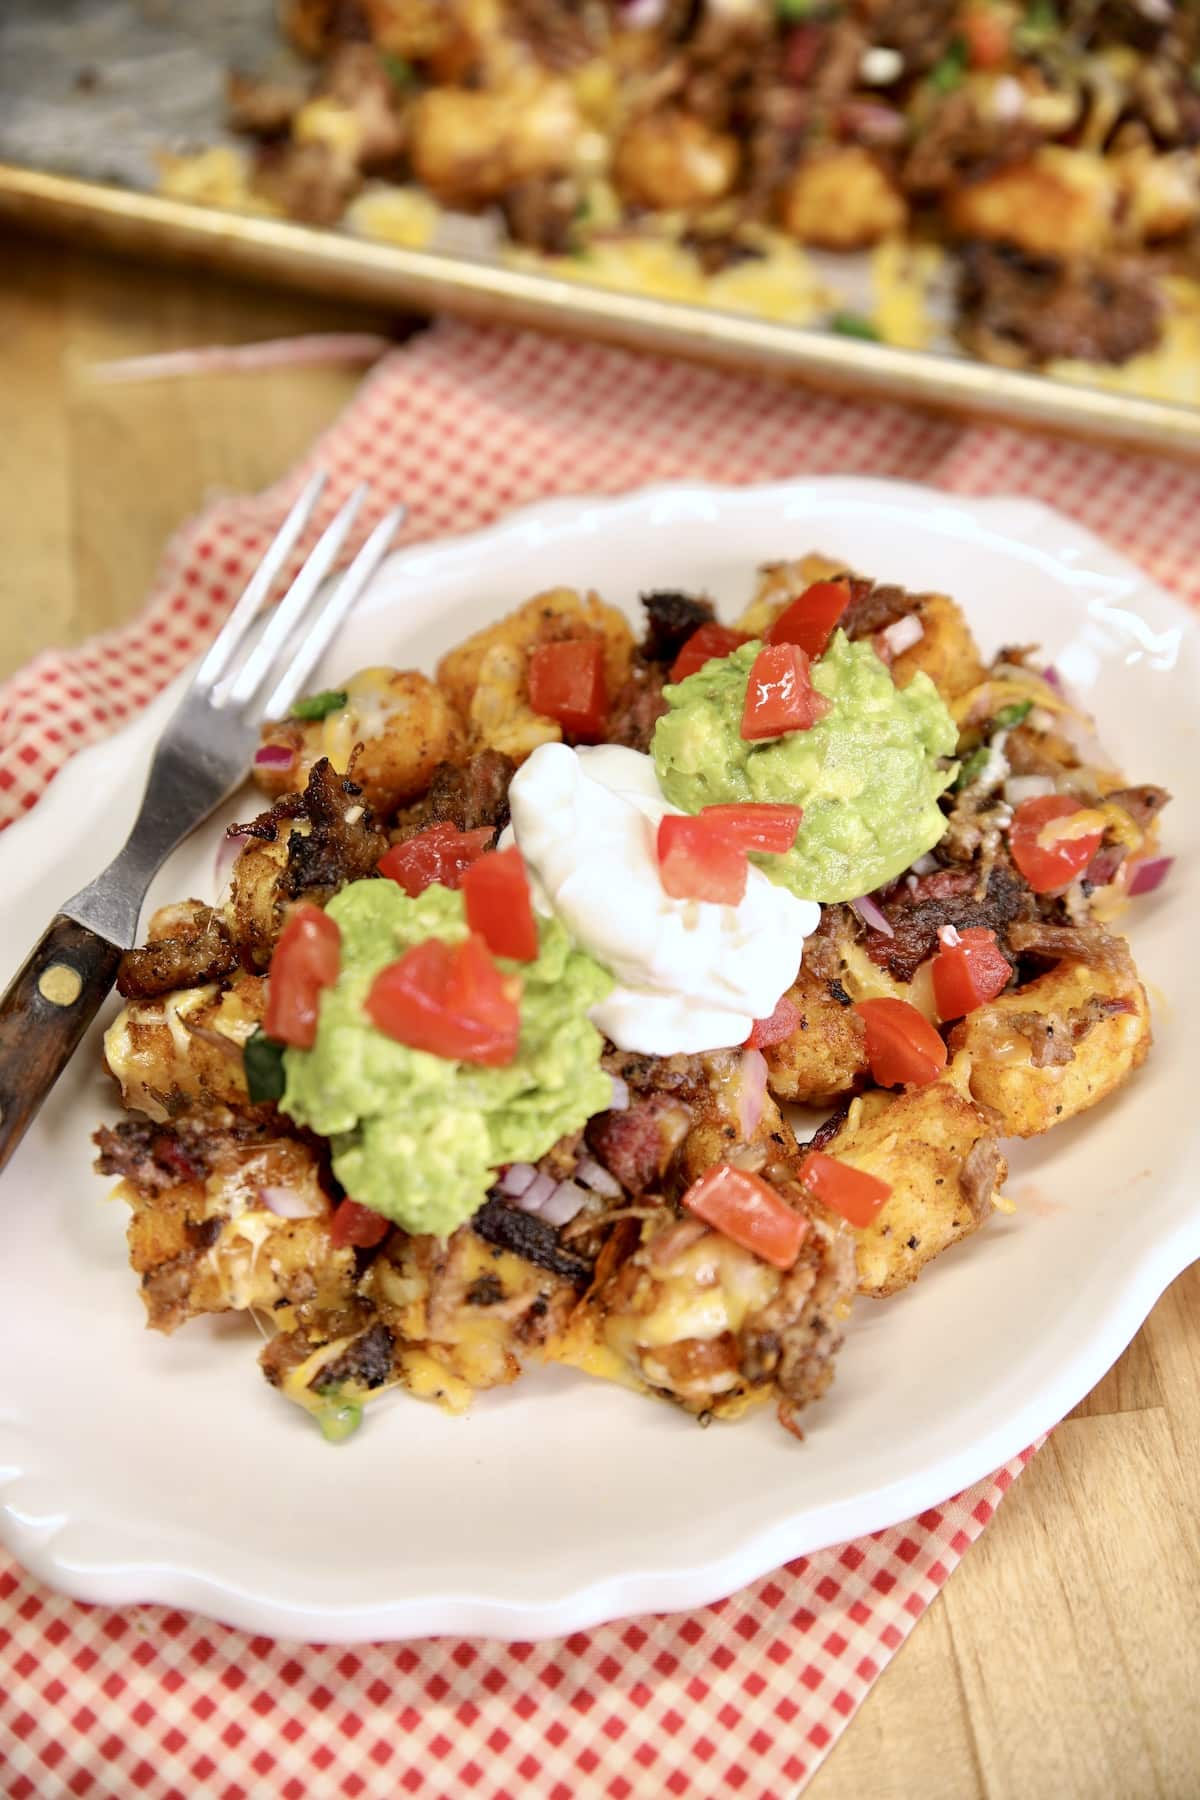 Tater tot nachos on a plate, topped with sour cream and guacamole.